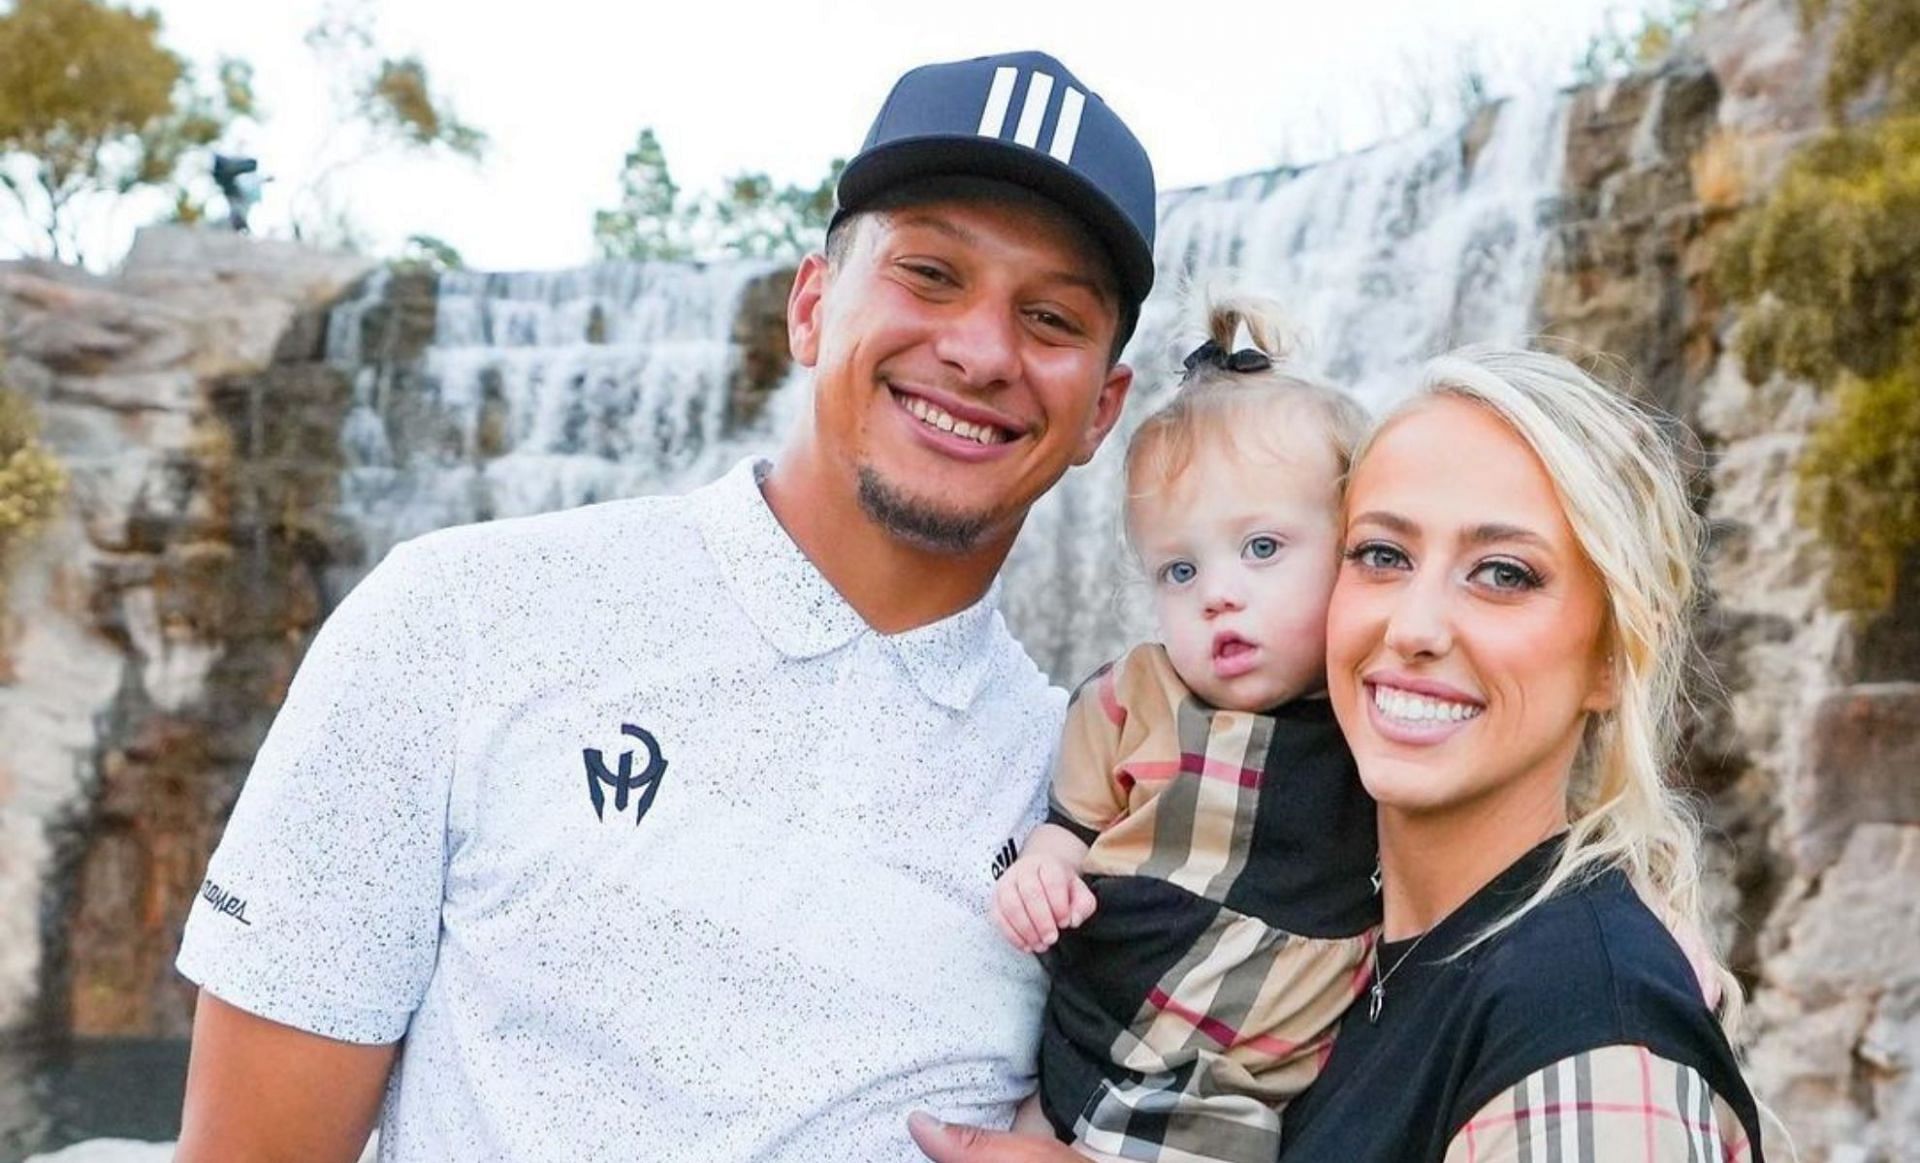 Patrick Mahomes is proud of daughter Sterling